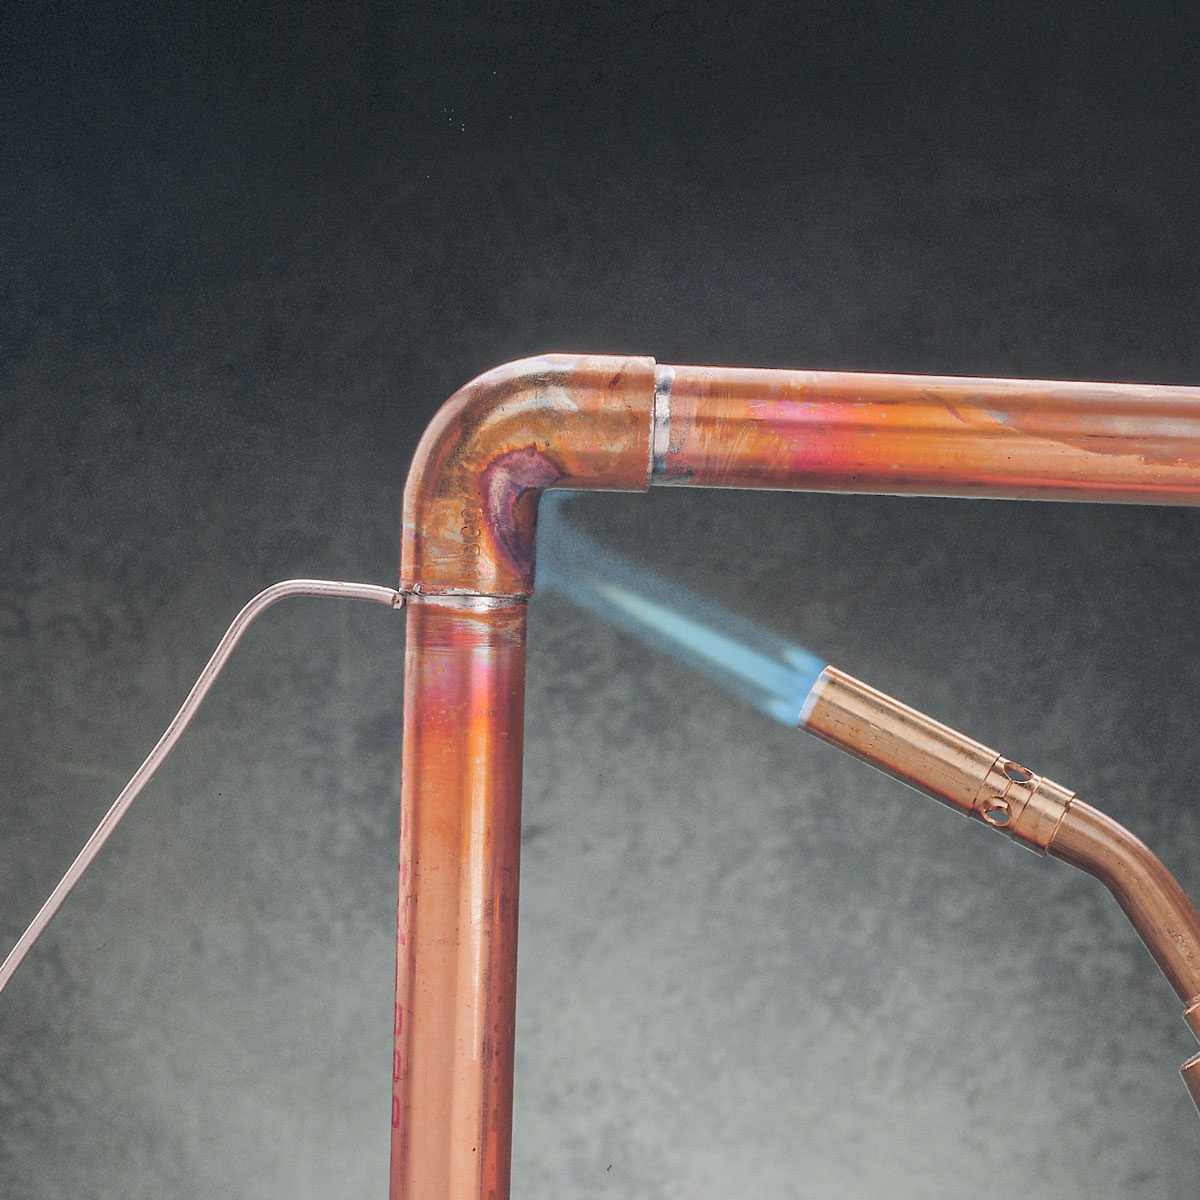 How to Desolder and Clean Copper Pipe and Fittings : 6 Steps